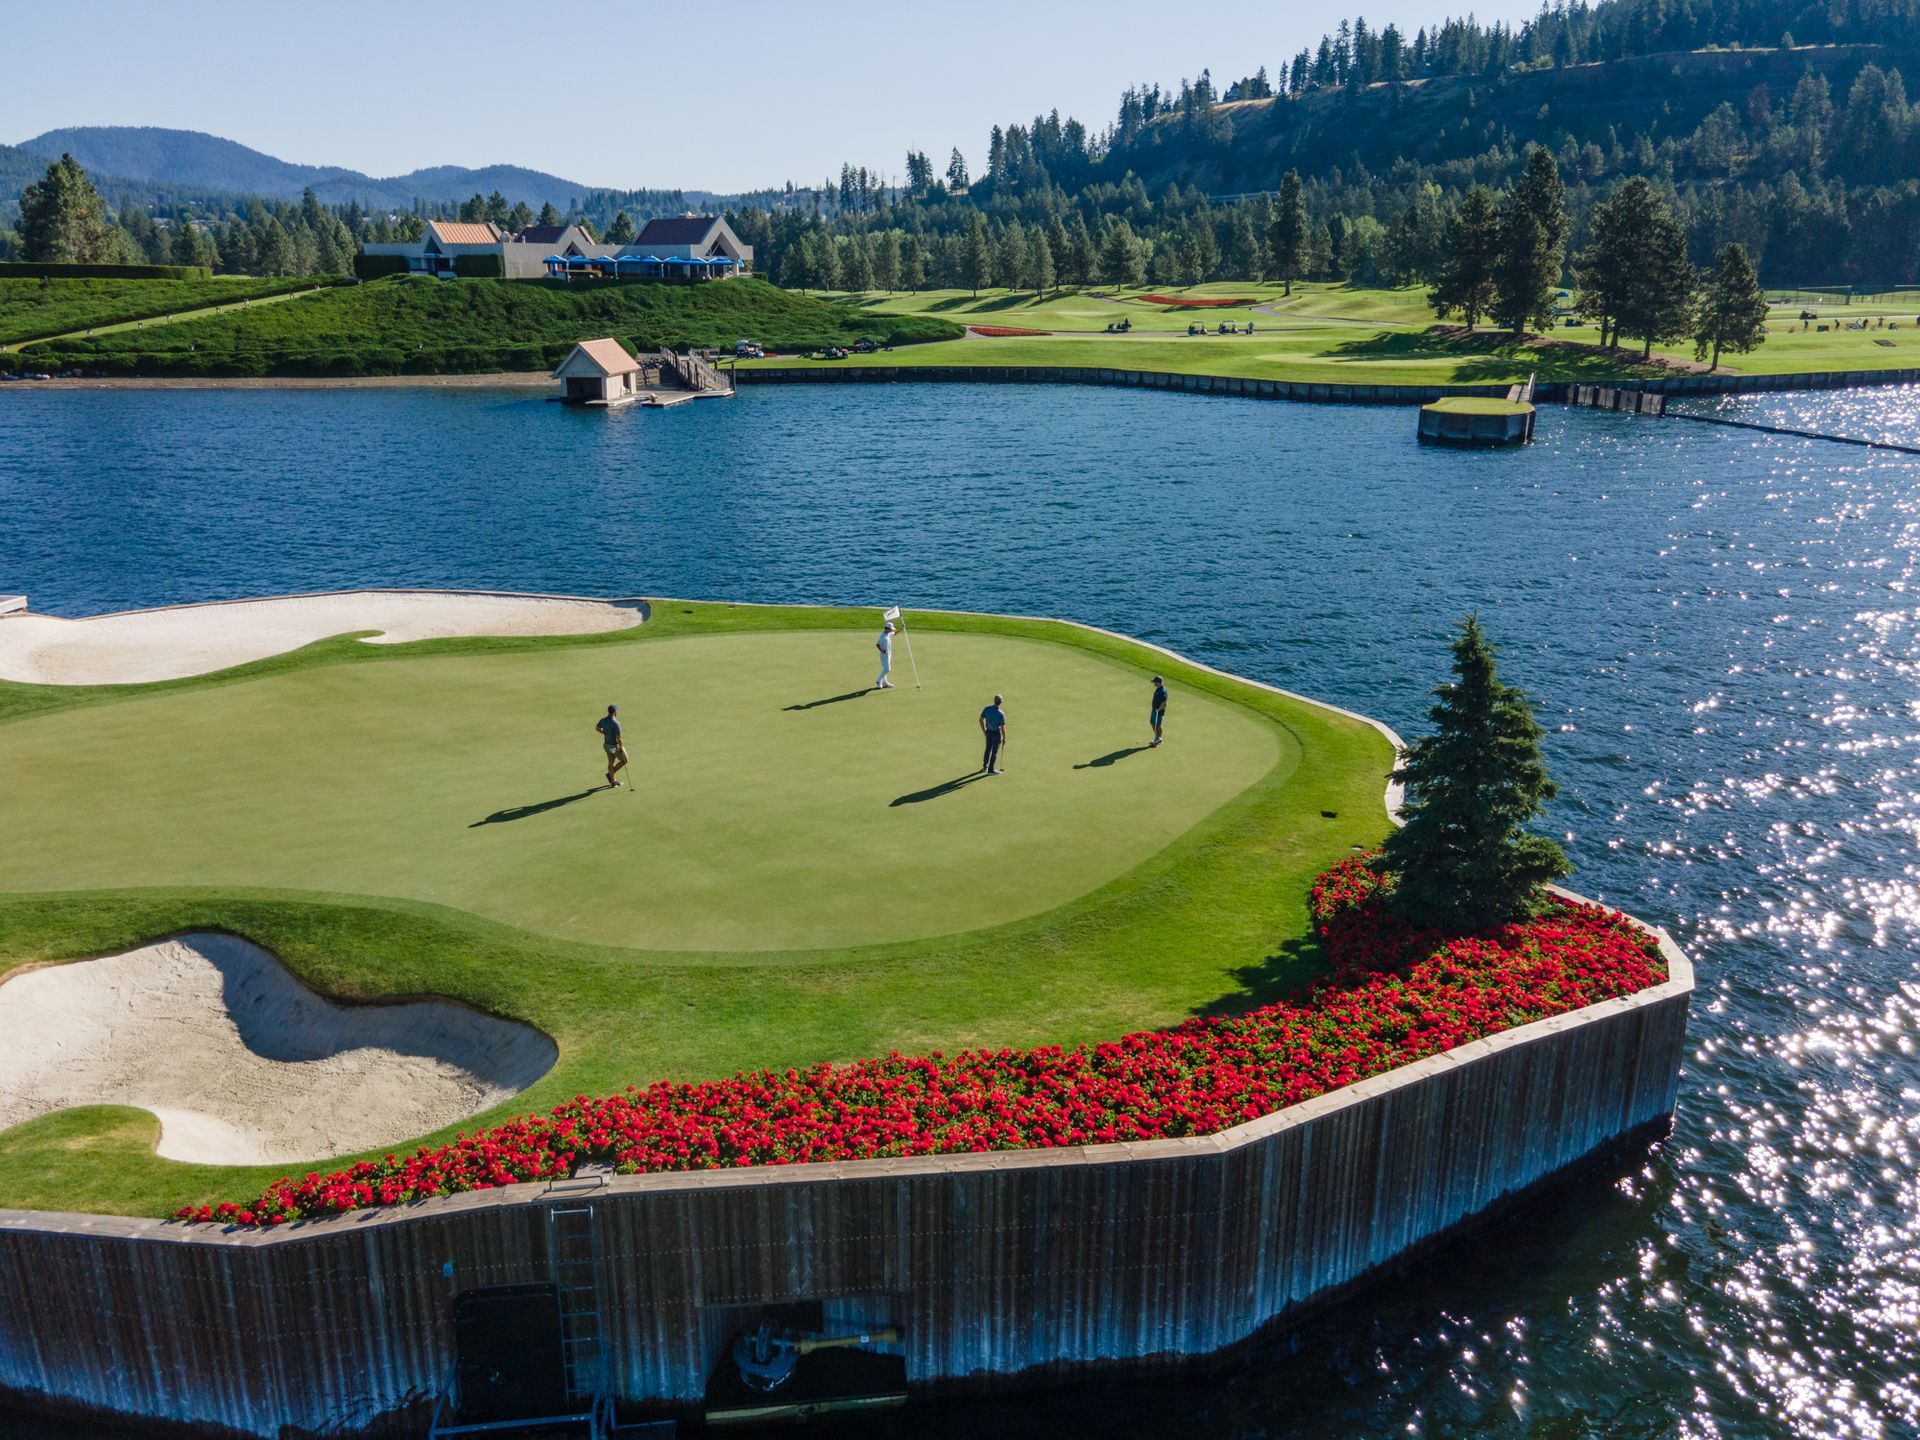 World's First Floating, Movable Island Golf Green, world record in Coeur d'Alene , Idaho
